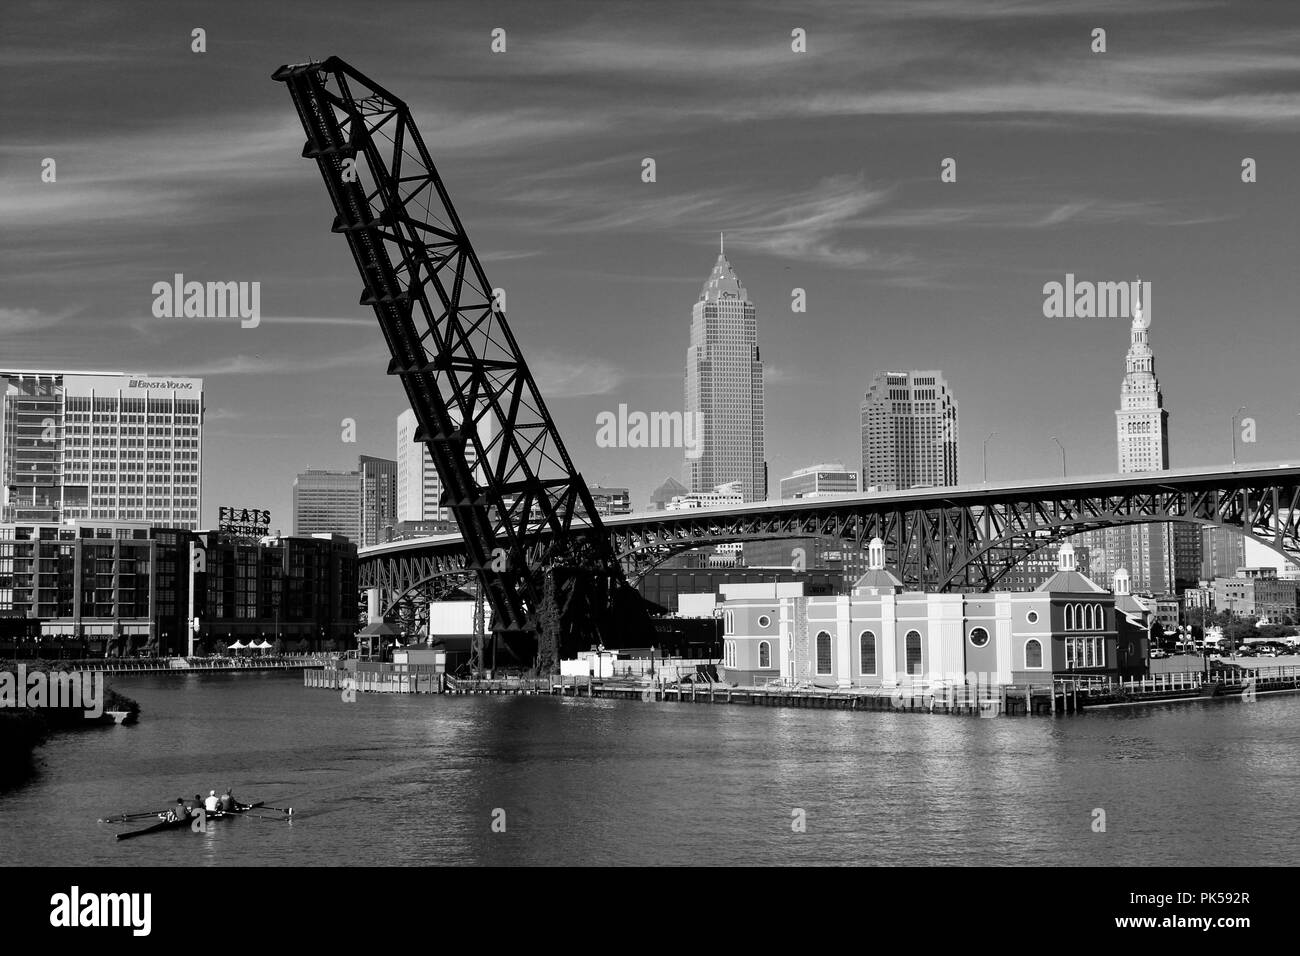 cityscape on the river in black and white with a bridge Stock Photo